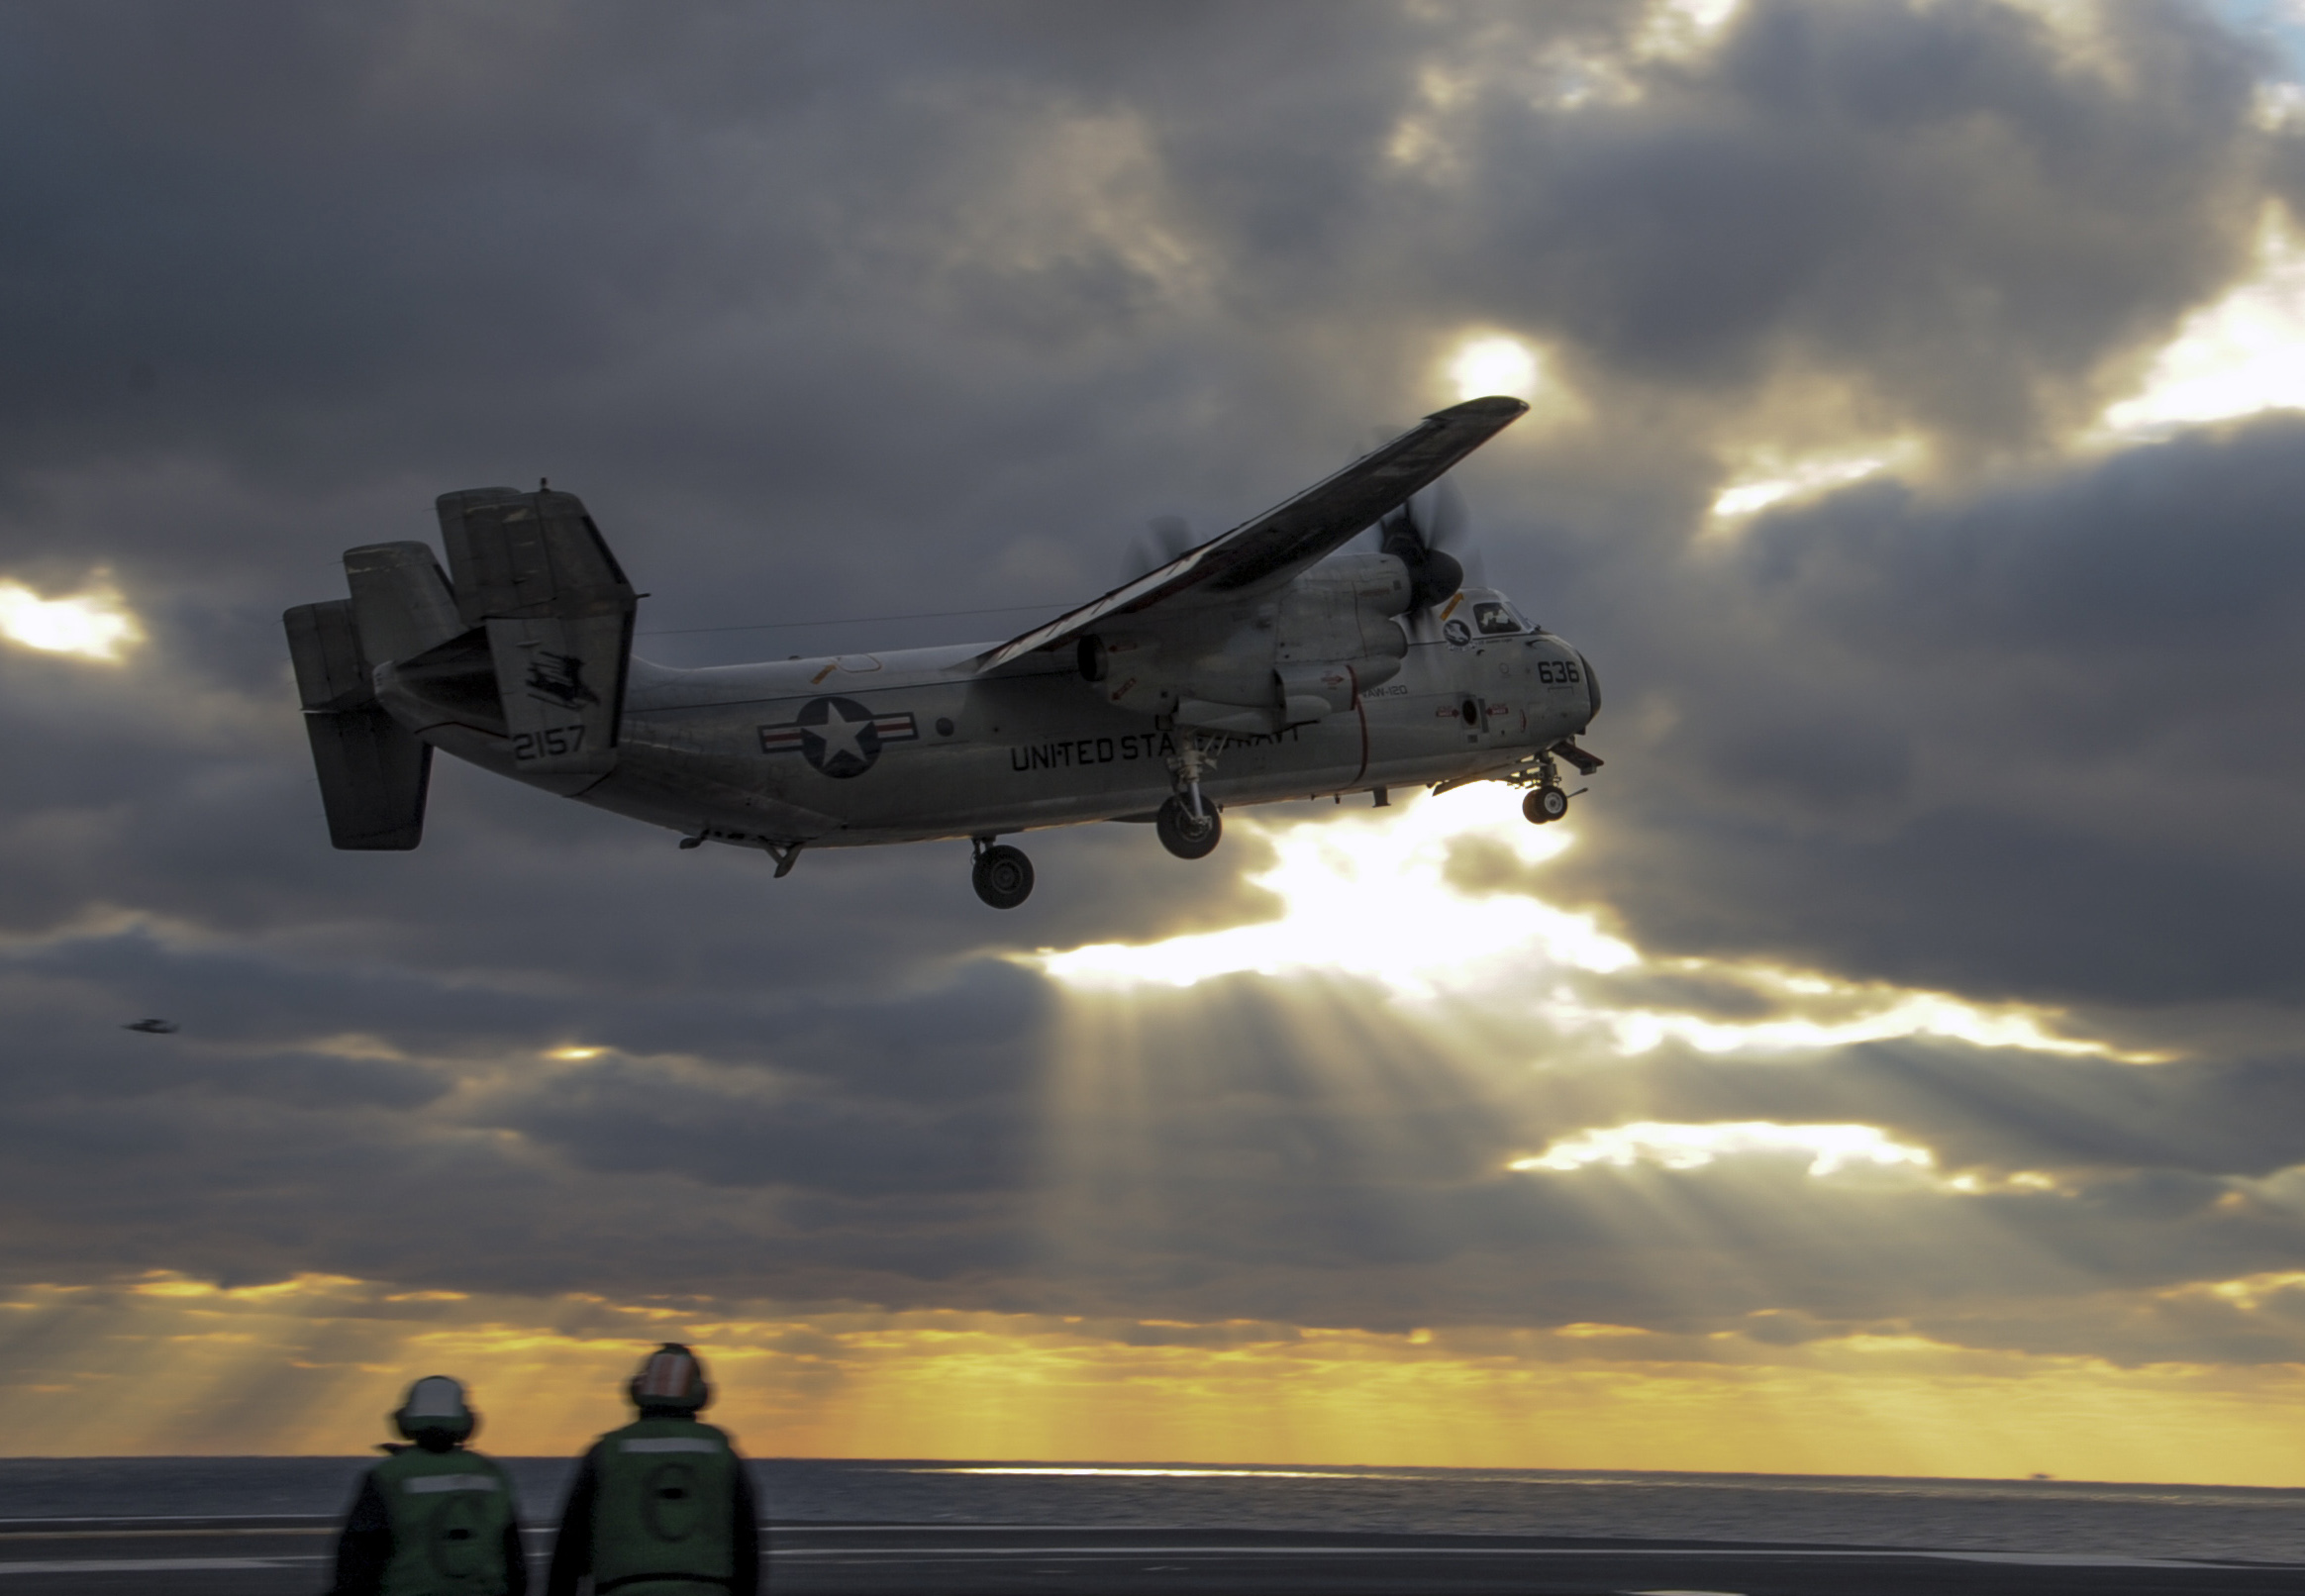 A C-2A Greyhound, takes off from the flight deck of the aircraft carrier USS Theodore Roosevelt (CVN-71). US Navy Photo